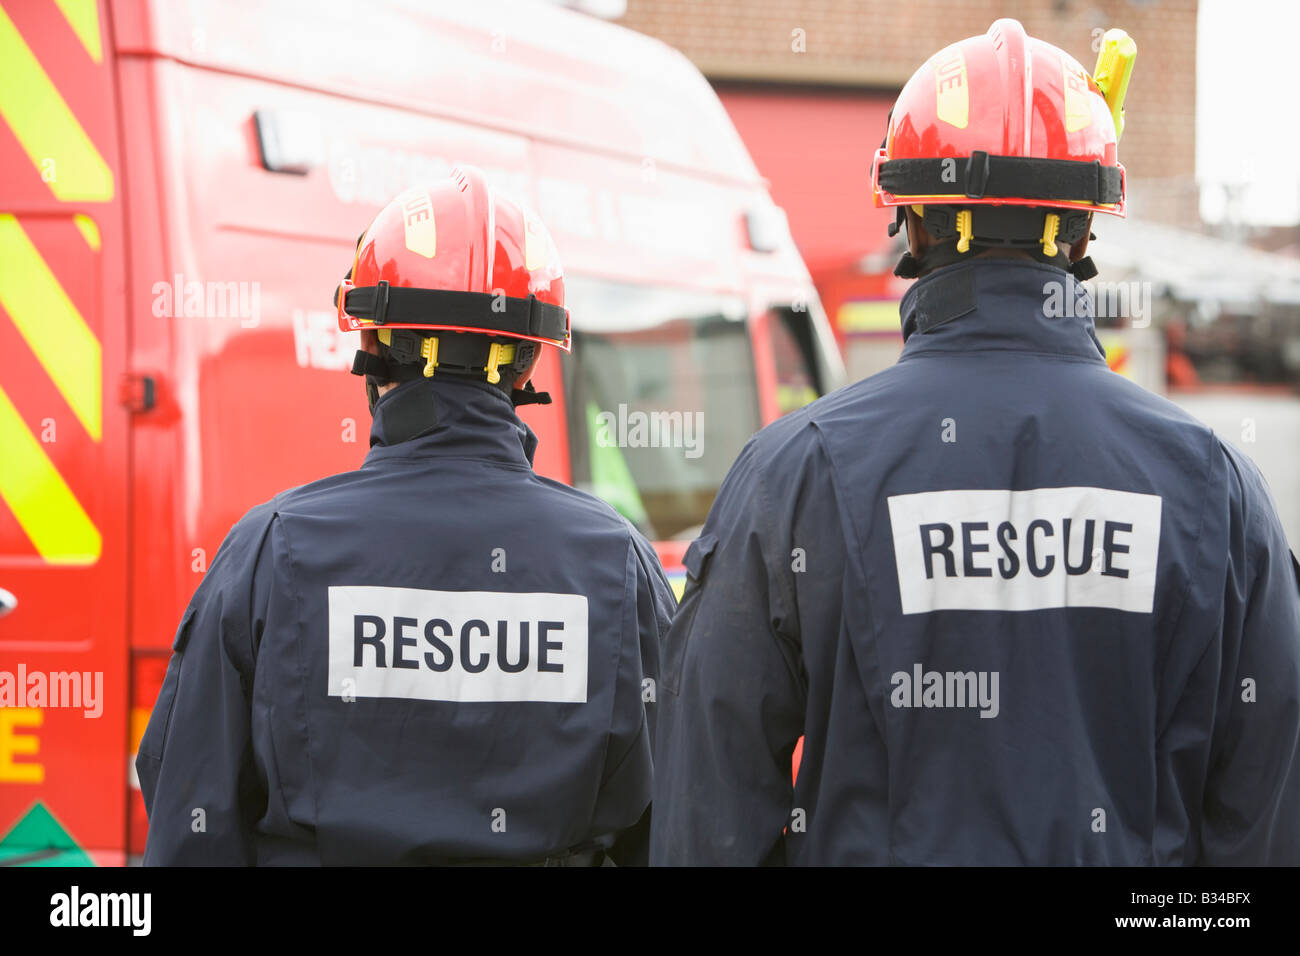 Two rescue workers standing near rescue vehicle Stock Photo